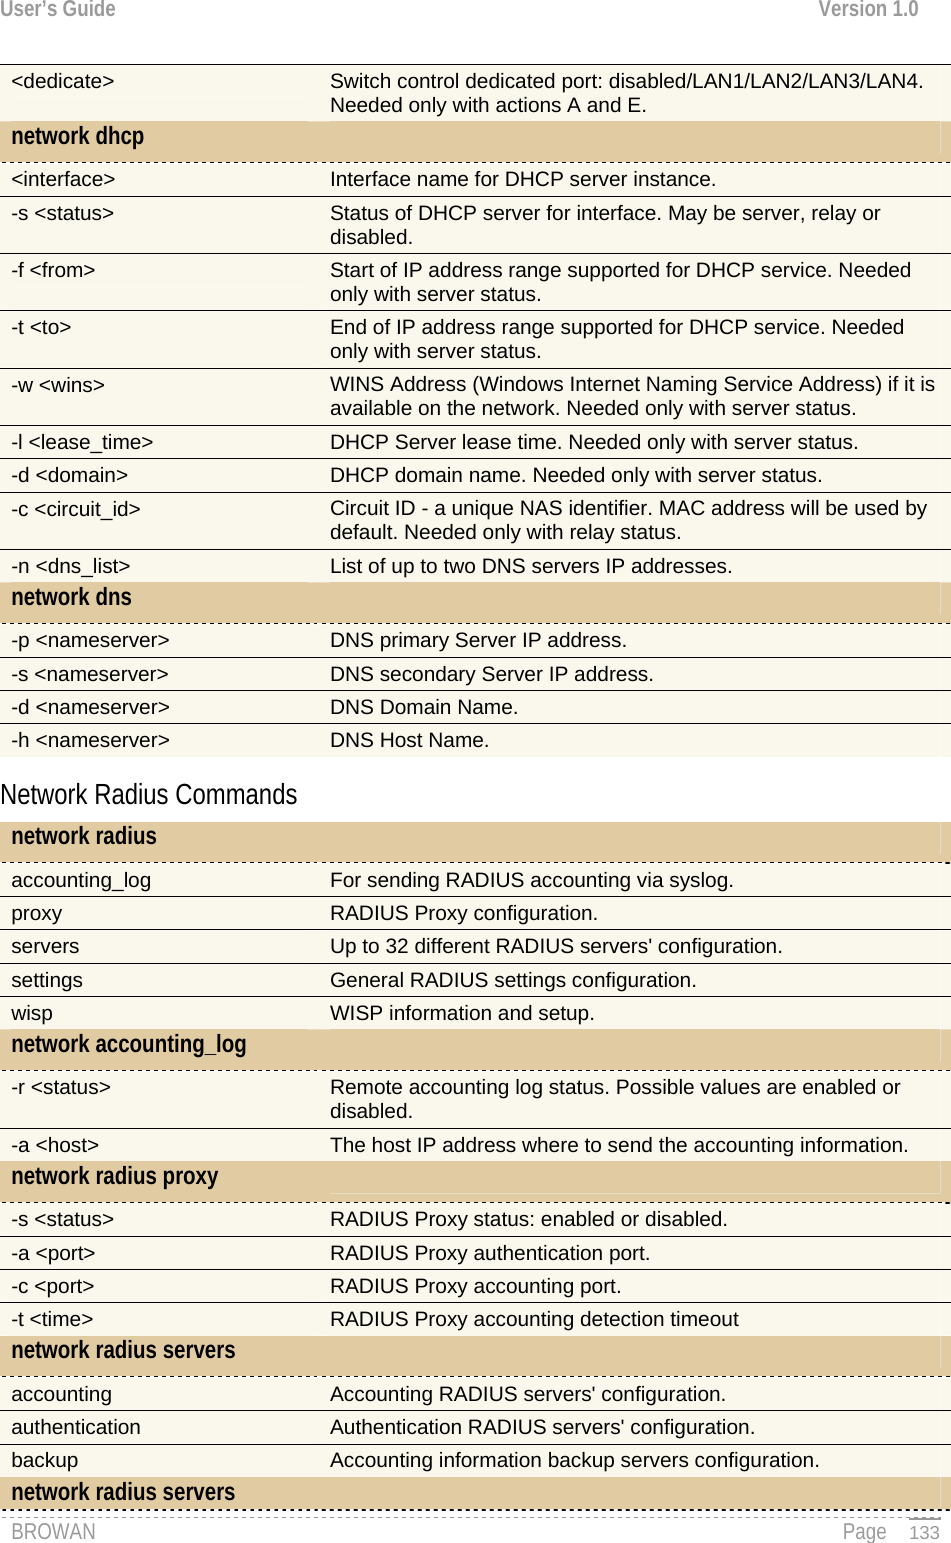 User’s Guide  Version 1.0  BROWAN                                                                                                                                               Page Switch control dedicated port: disabled/LAN1/LAN2/LAN3/LAN4. Needed only with actions A and E. &lt;dedicate&gt; network dhcp   &lt;interface&gt;  Interface name for DHCP server instance. Status of DHCP server for interface. May be server, relay or disabled. -s &lt;status&gt; Start of IP address range supported for DHCP service. Needed only with server status. -f &lt;from&gt;       End of IP address range supported for DHCP service. Needed only with server status. -t &lt;to&gt; WINS Address (Windows Internet Naming Service Address) if it is available on the network. Needed only with server status. -w &lt;wins&gt; -l &lt;lease_time&gt;  DHCP Server lease time. Needed only with server status. -d &lt;domain&gt;  DHCP domain name. Needed only with server status. Circuit ID - a unique NAS identifier. MAC address will be used by default. Needed only with relay status. -c &lt;circuit_id&gt; -n &lt;dns_list&gt;  List of up to two DNS servers IP addresses. network dns    -p &lt;nameserver&gt;   DNS primary Server IP address. -s &lt;nameserver&gt;  DNS secondary Server IP address. -d &lt;nameserver&gt;  DNS Domain Name. -h &lt;nameserver&gt;  DNS Host Name. Network Radius Commands network radius   accounting_log  For sending RADIUS accounting via syslog. proxy  RADIUS Proxy configuration. servers  Up to 32 different RADIUS servers&apos; configuration. settings  General RADIUS settings configuration. wisp  WISP information and setup. network accounting_log   Remote accounting log status. Possible values are enabled or disabled. -r &lt;status&gt; -a &lt;host&gt;  The host IP address where to send the accounting information. network radius proxy   -s &lt;status&gt;   RADIUS Proxy status: enabled or disabled. -a &lt;port&gt;     RADIUS Proxy authentication port. -c &lt;port&gt;     RADIUS Proxy accounting port. -t &lt;time&gt;     RADIUS Proxy accounting detection timeout network radius servers   accounting  Accounting RADIUS servers&apos; configuration. authentication  Authentication RADIUS servers&apos; configuration. backup  Accounting information backup servers configuration. network radius servers     133